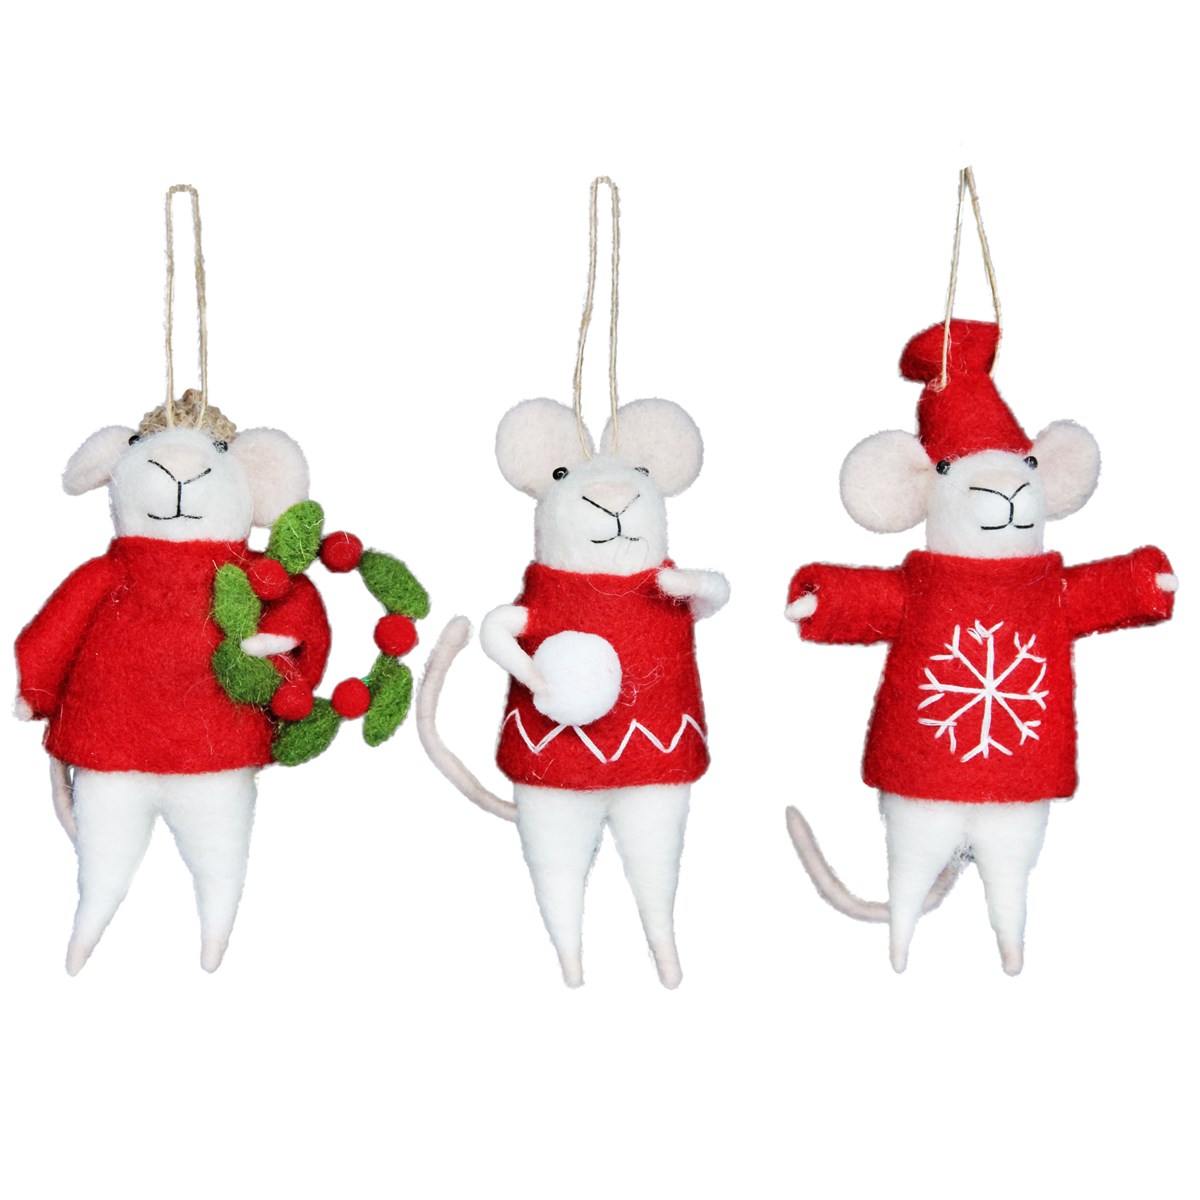 Red and white wool mice hanging Christmas decoration. By Gisela Graham. The perfect festive addition to your home.